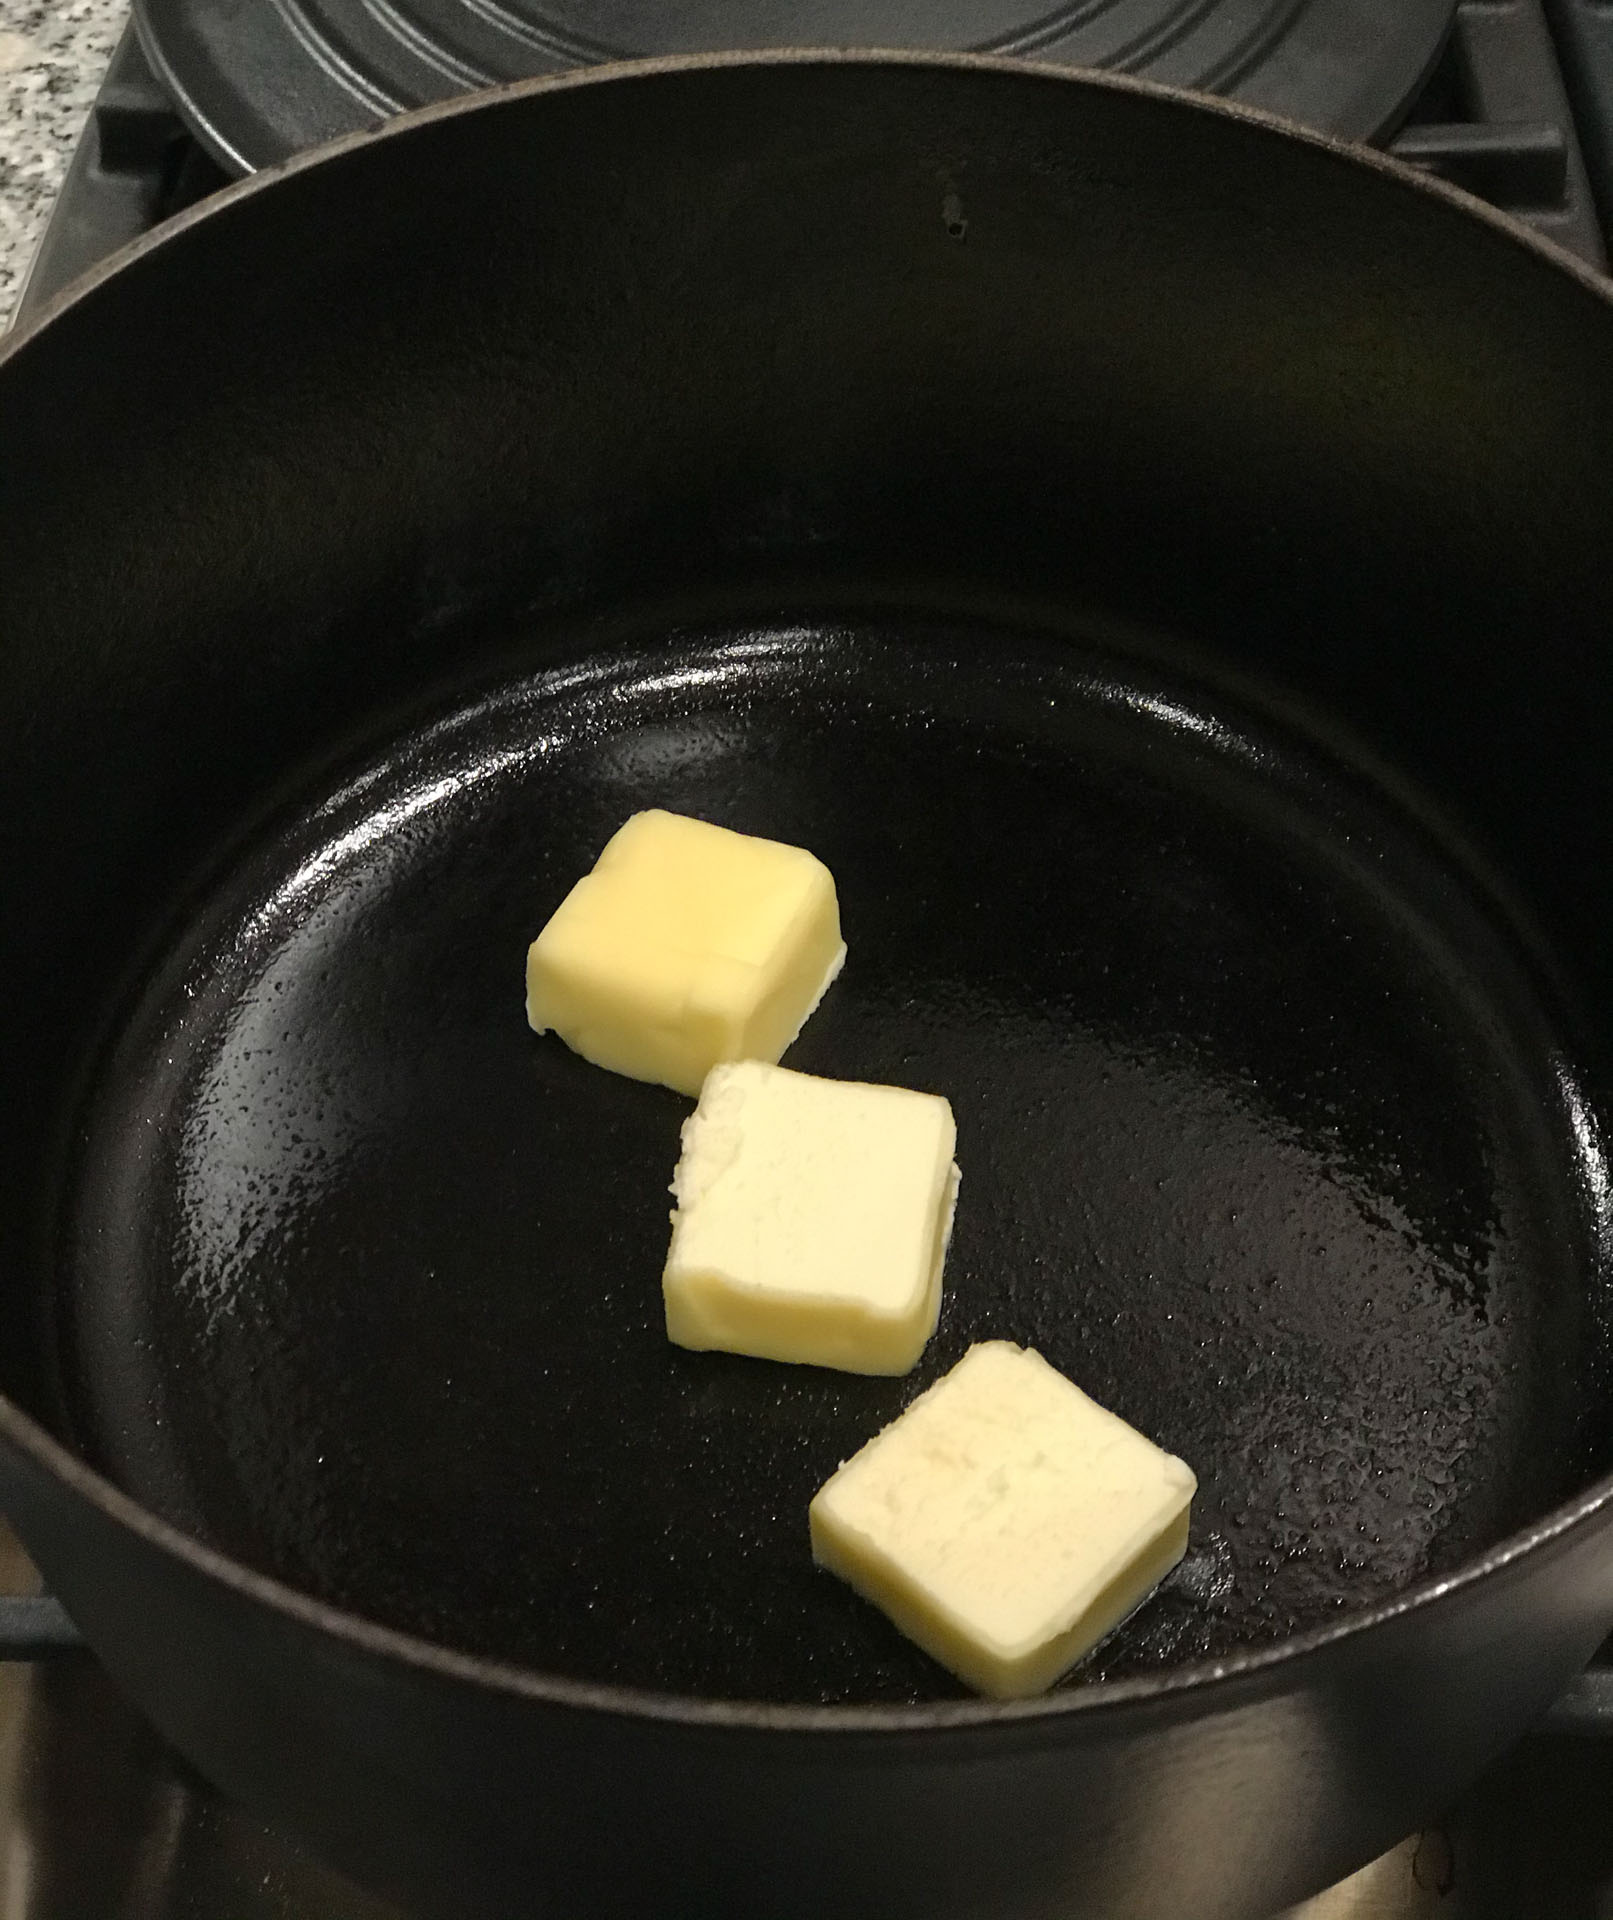 3 tablespoons of butter melting in a cast iron pan